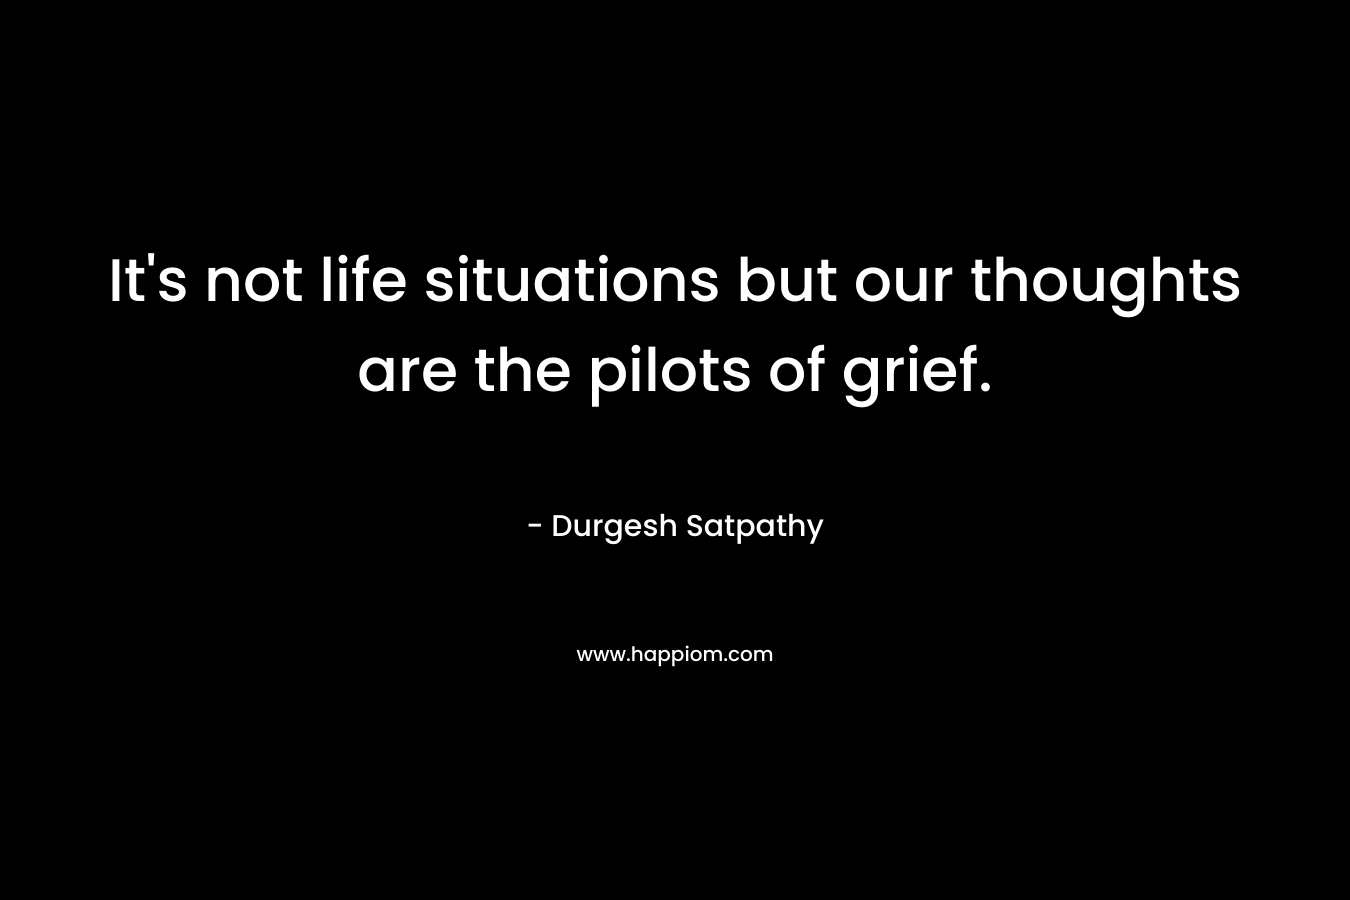 It's not life situations but our thoughts are the pilots of grief.